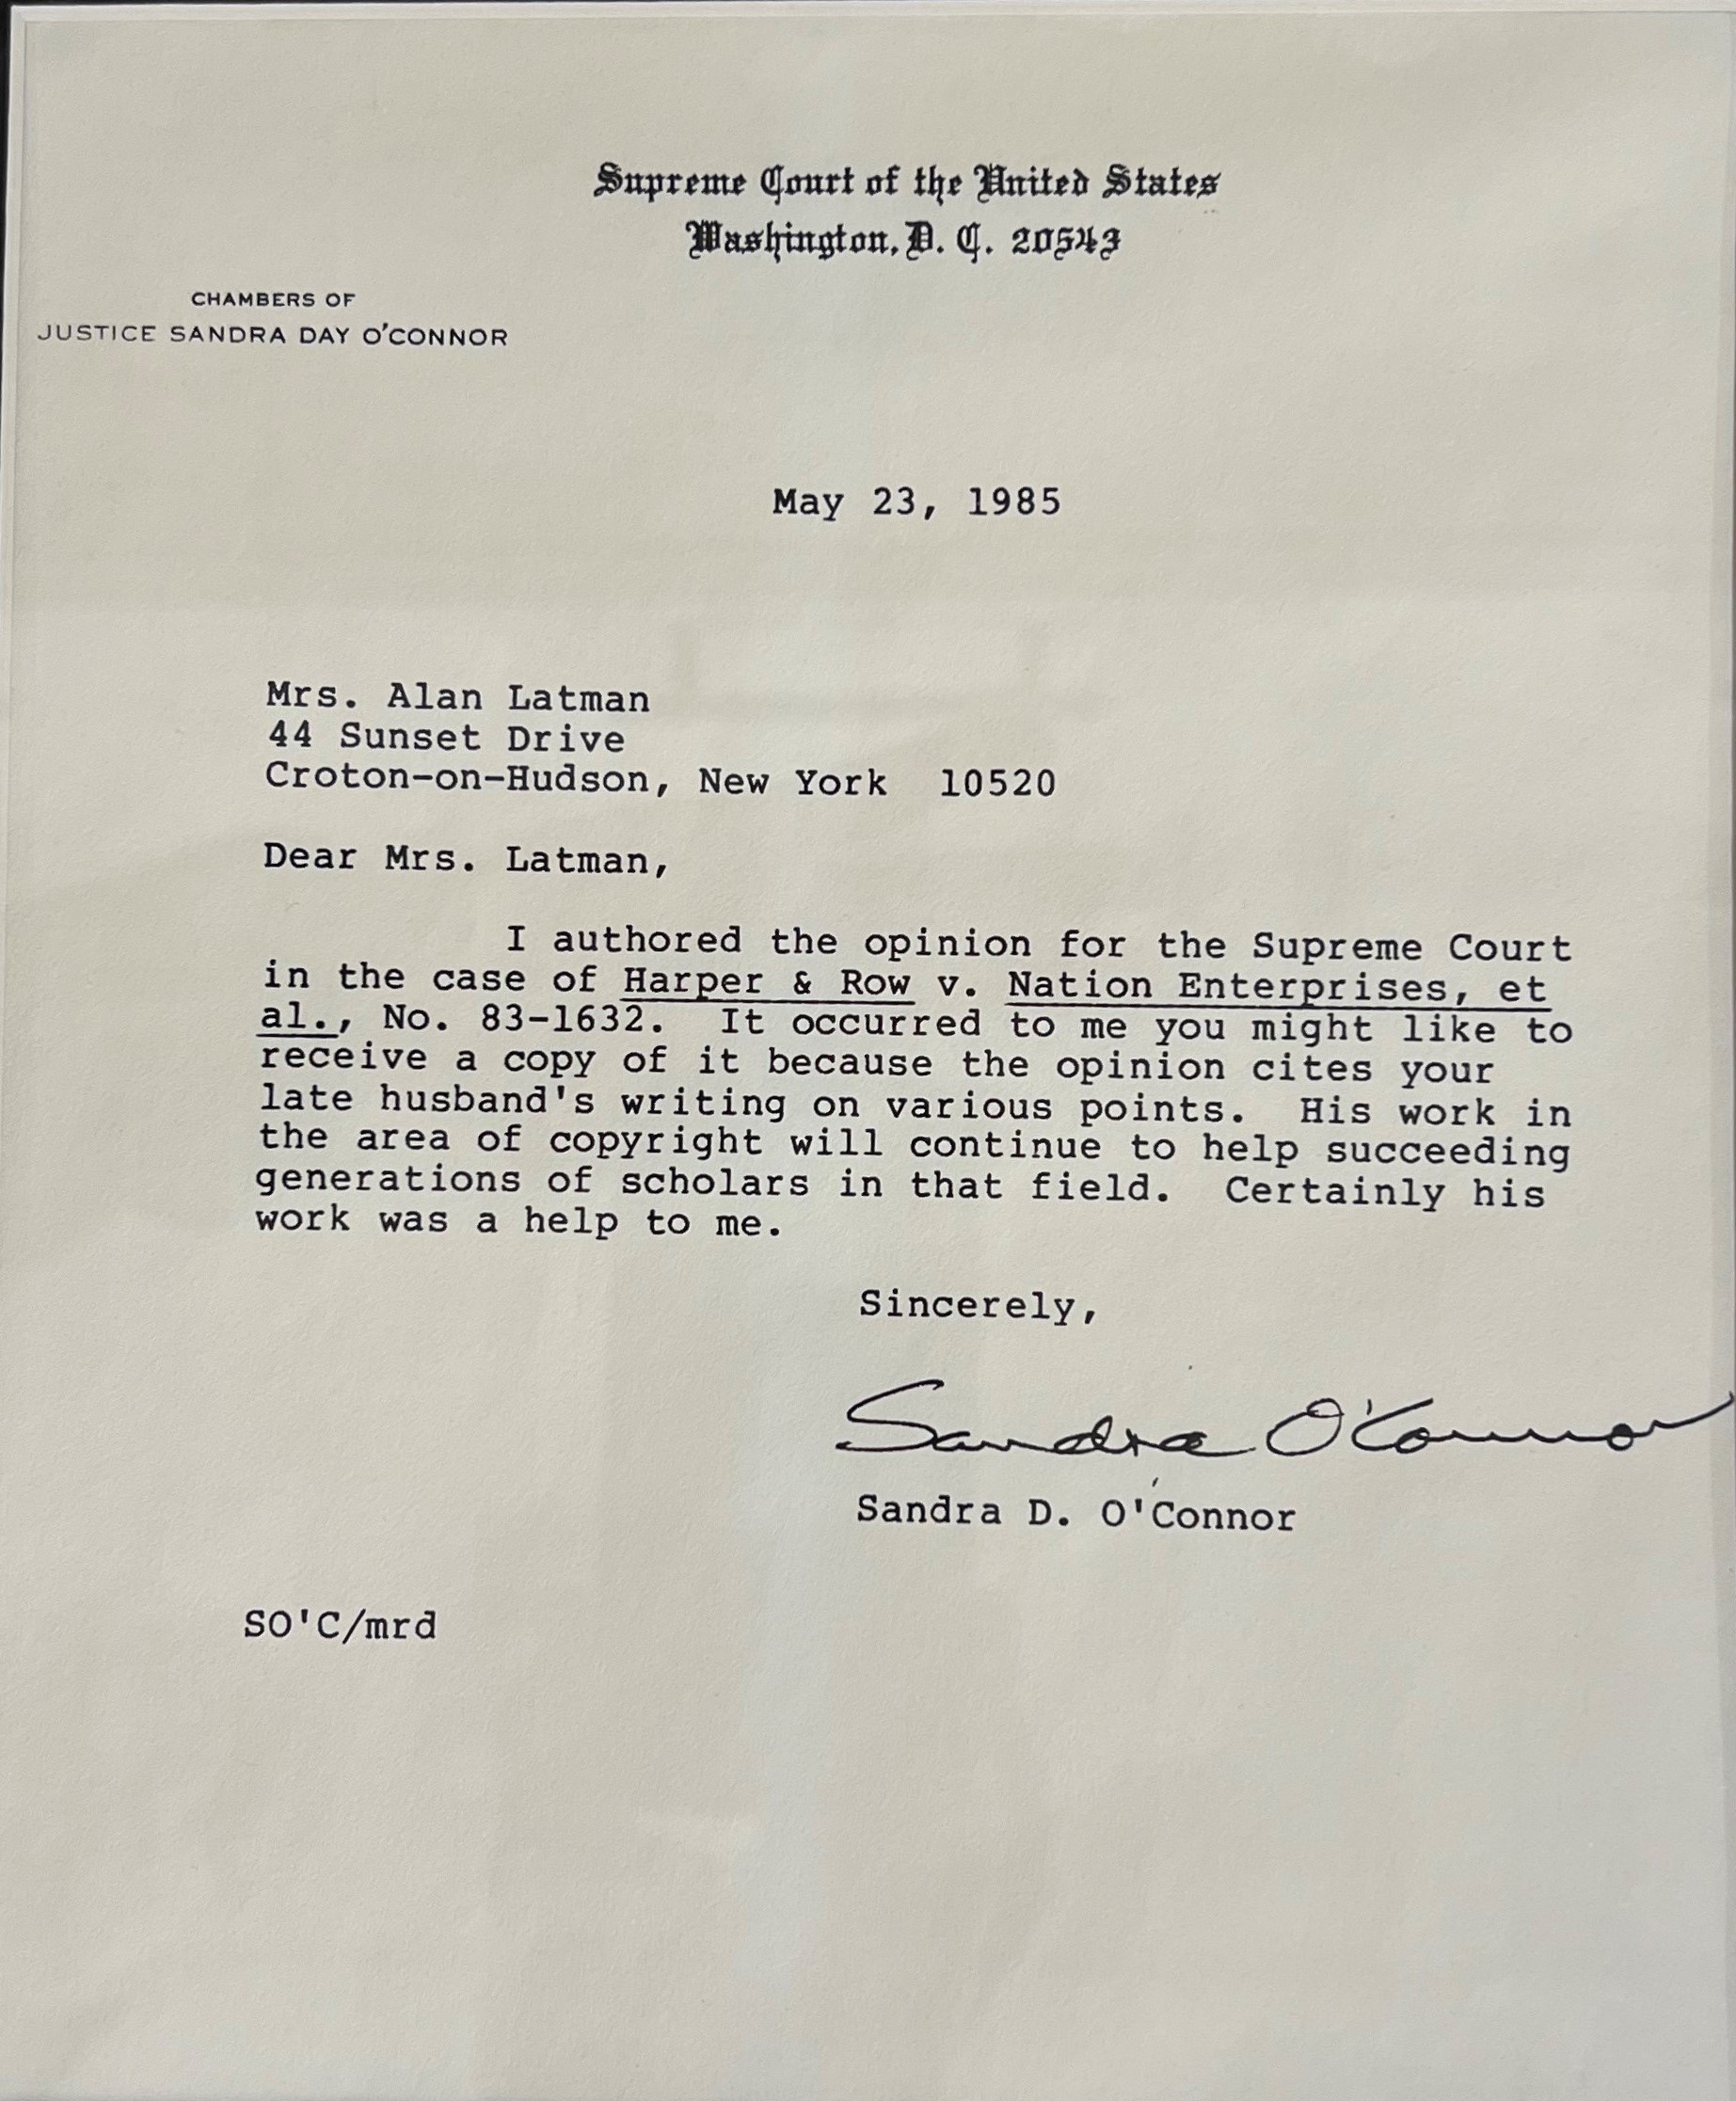 Letter from Sandra D. O'Connor